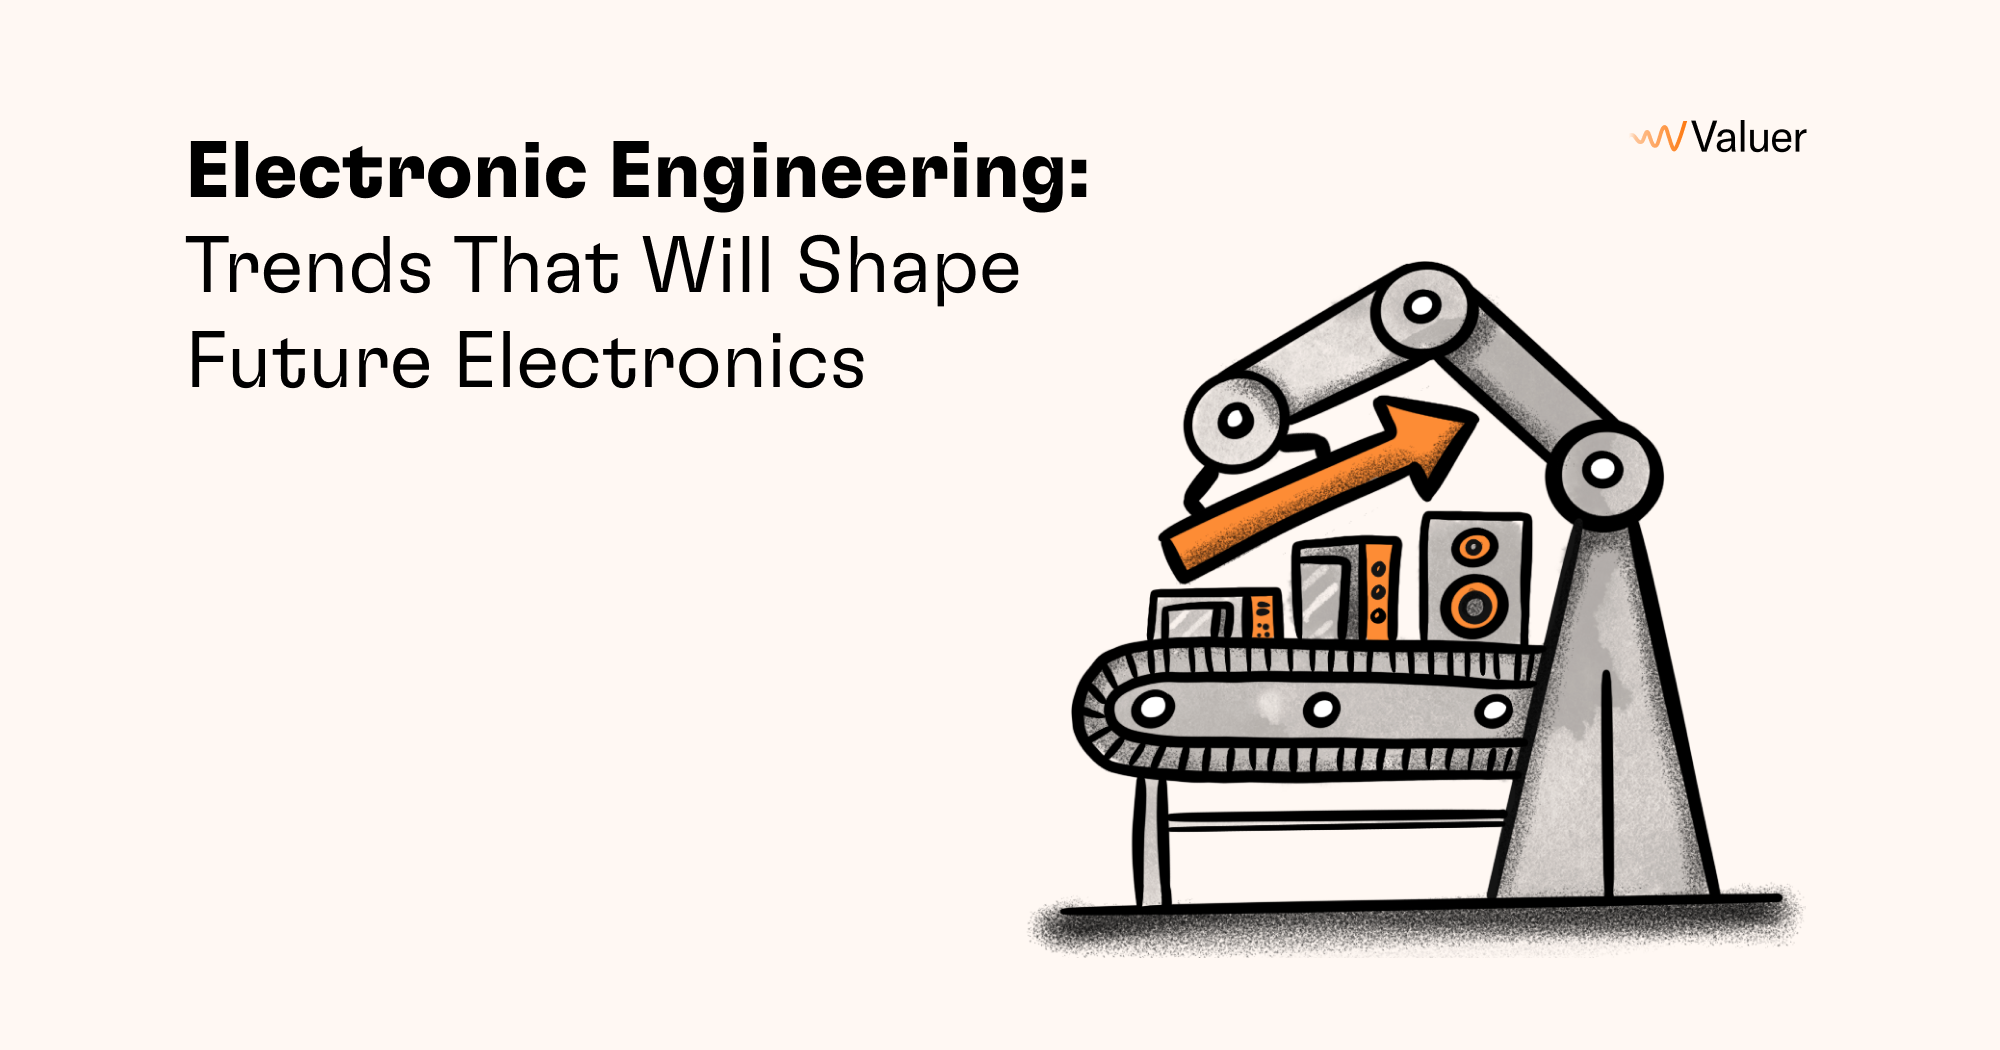 Electronic Engineering Trends: The Future of Electronics